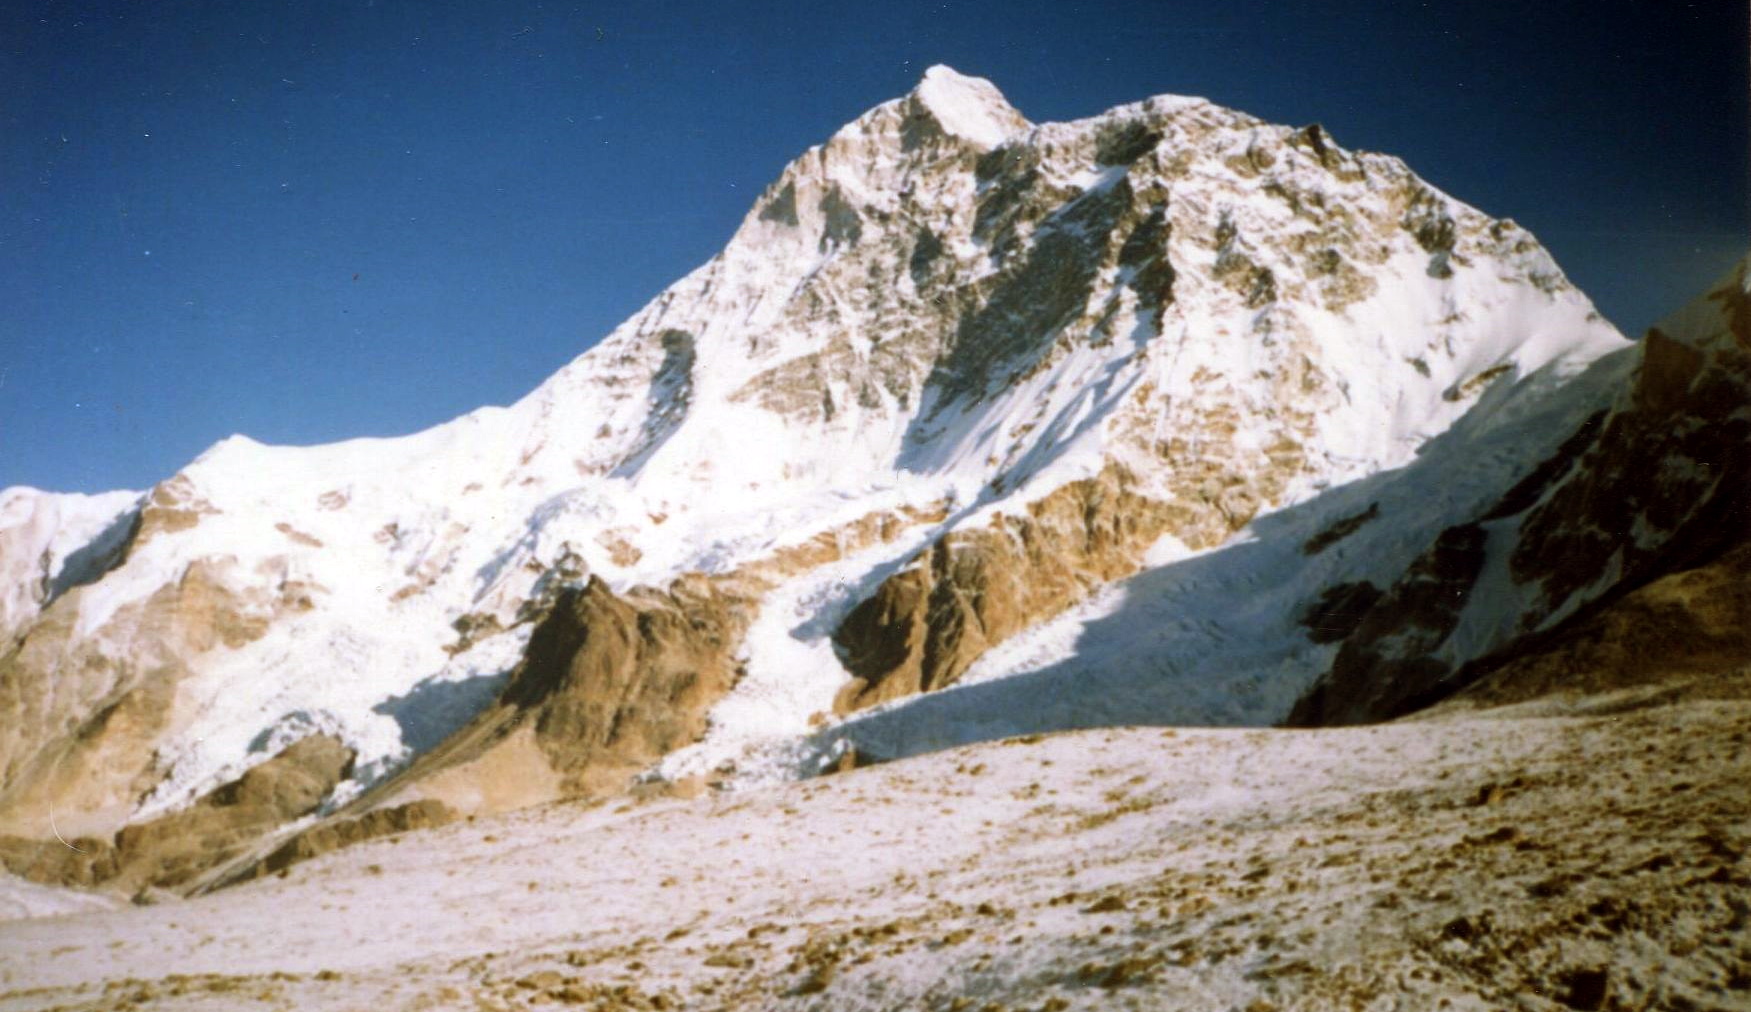 Mt.Makalu from above Shershon in the Barun Valley